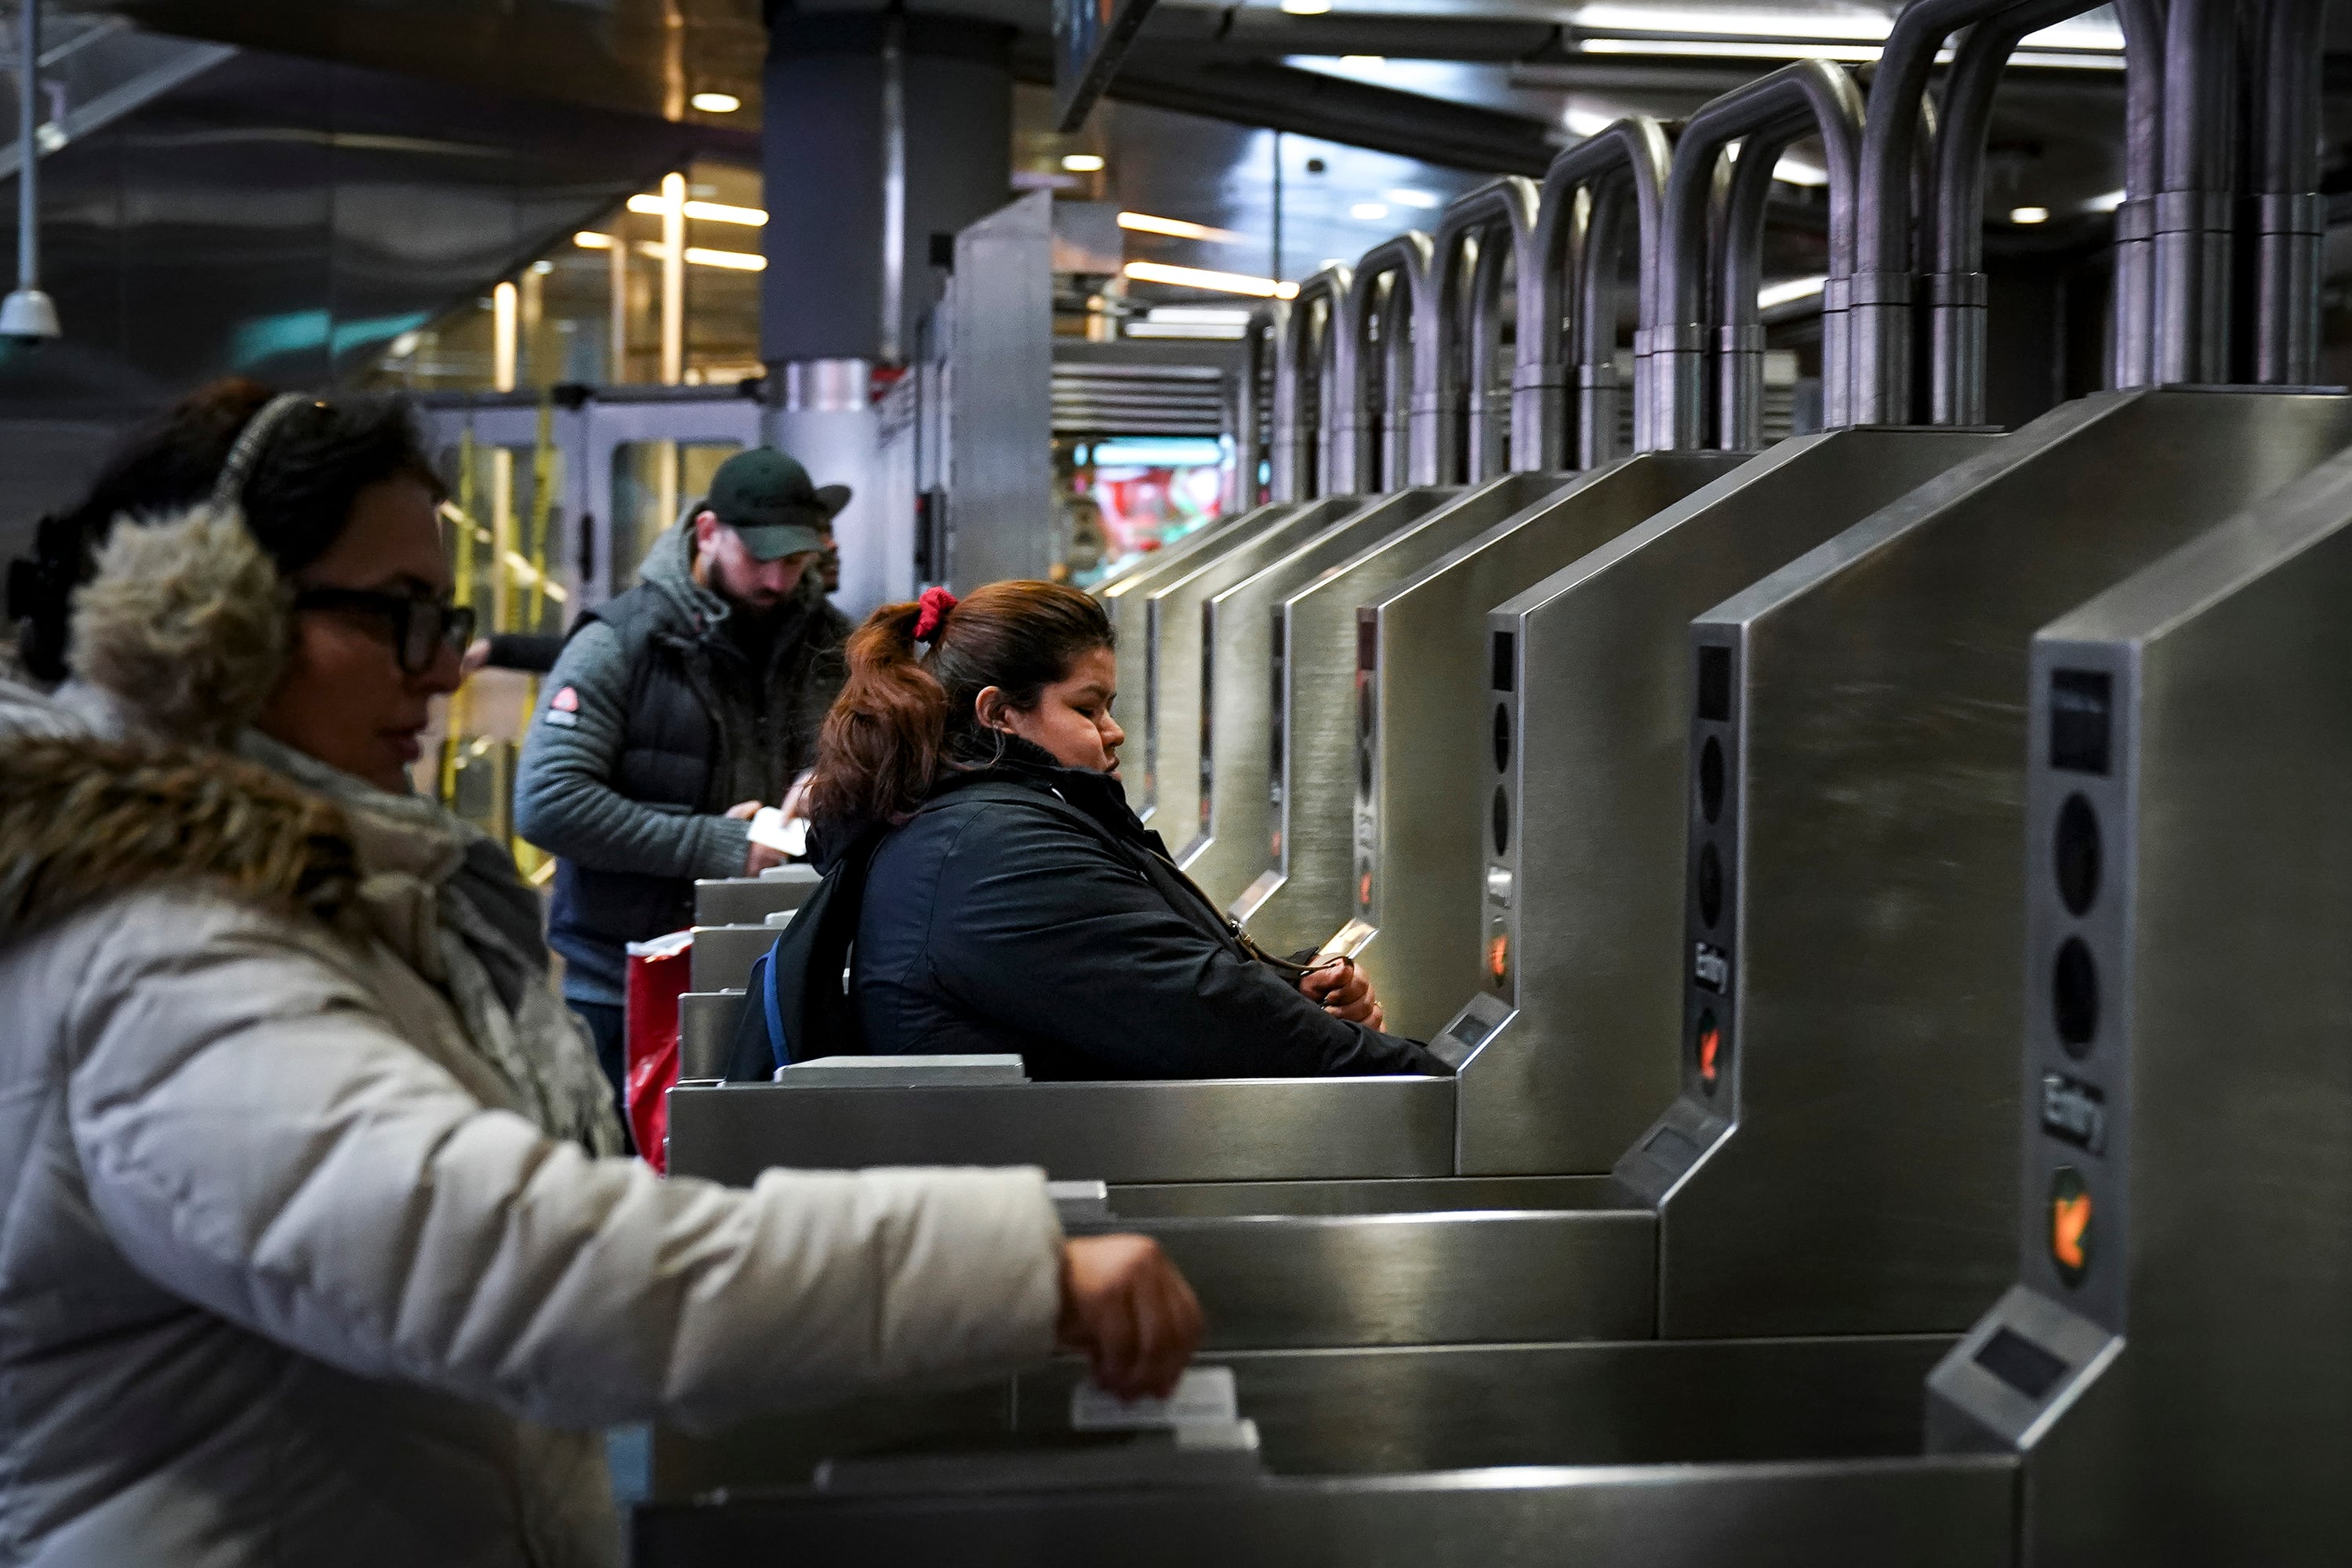 Three people wearing winter clothes swipe their metro cards to enter the New York City subway.